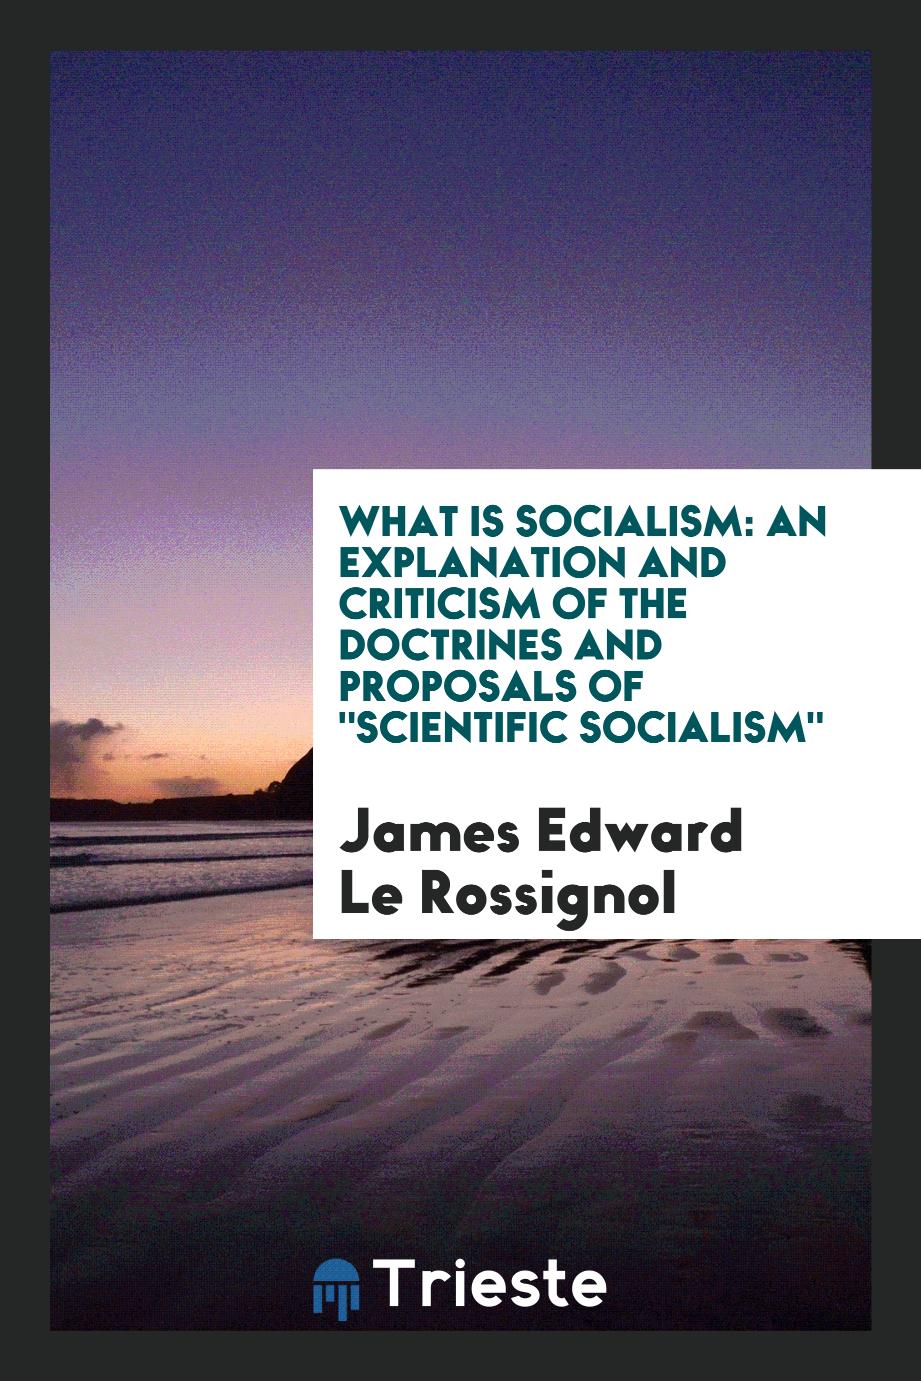 What is socialism: an explanation and criticism of the doctrines and proposals of "scientific socialism"